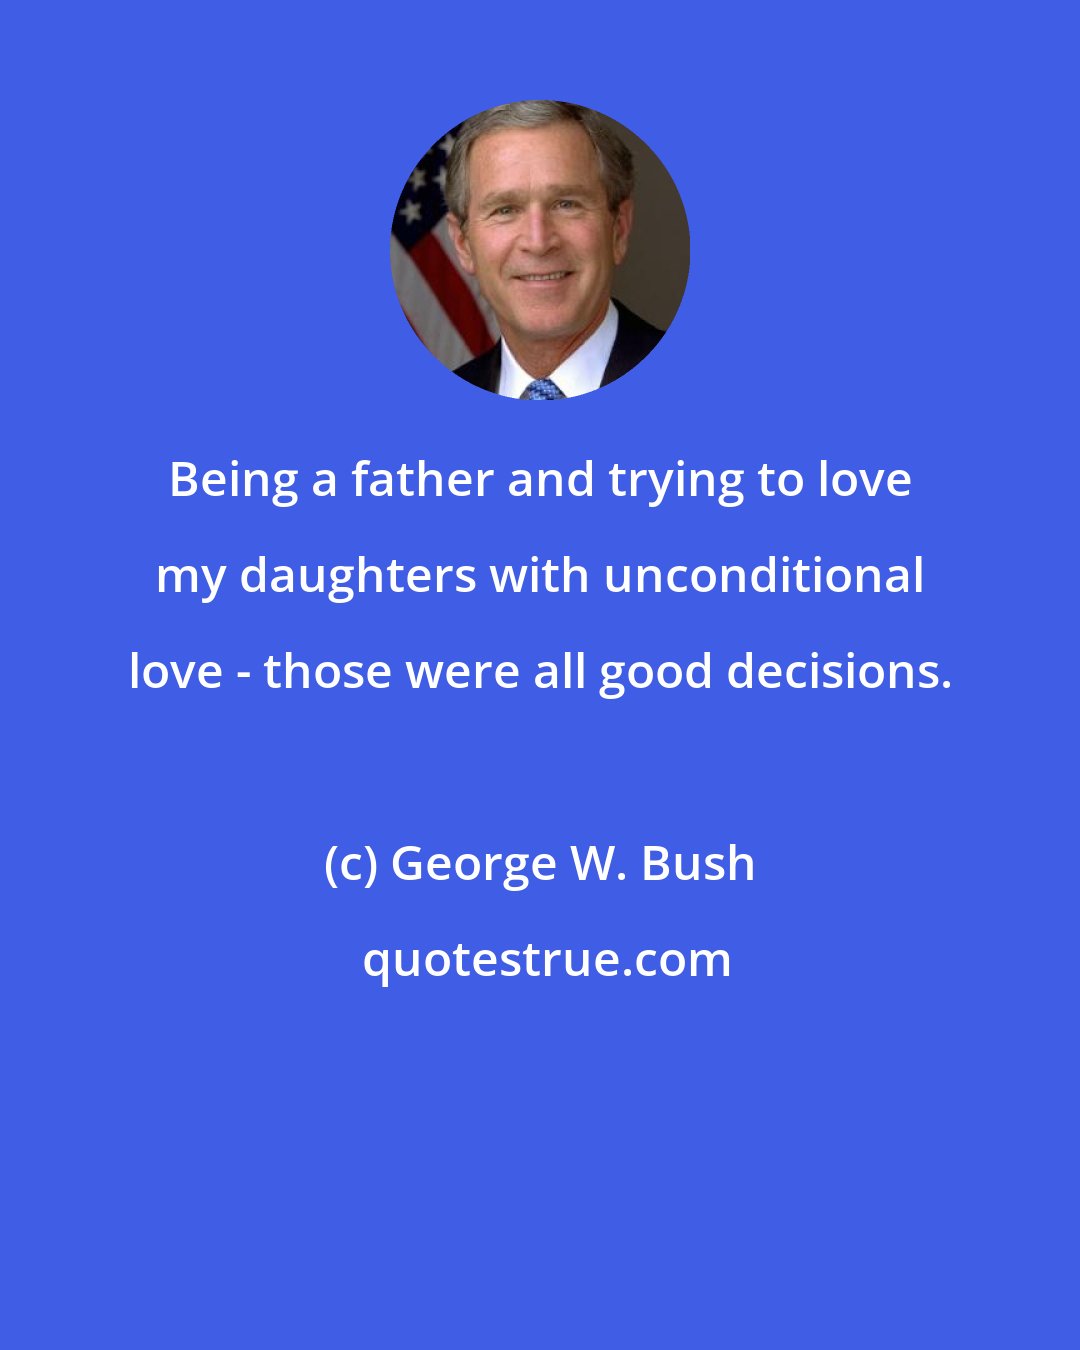 George W. Bush: Being a father and trying to love my daughters with unconditional love - those were all good decisions.